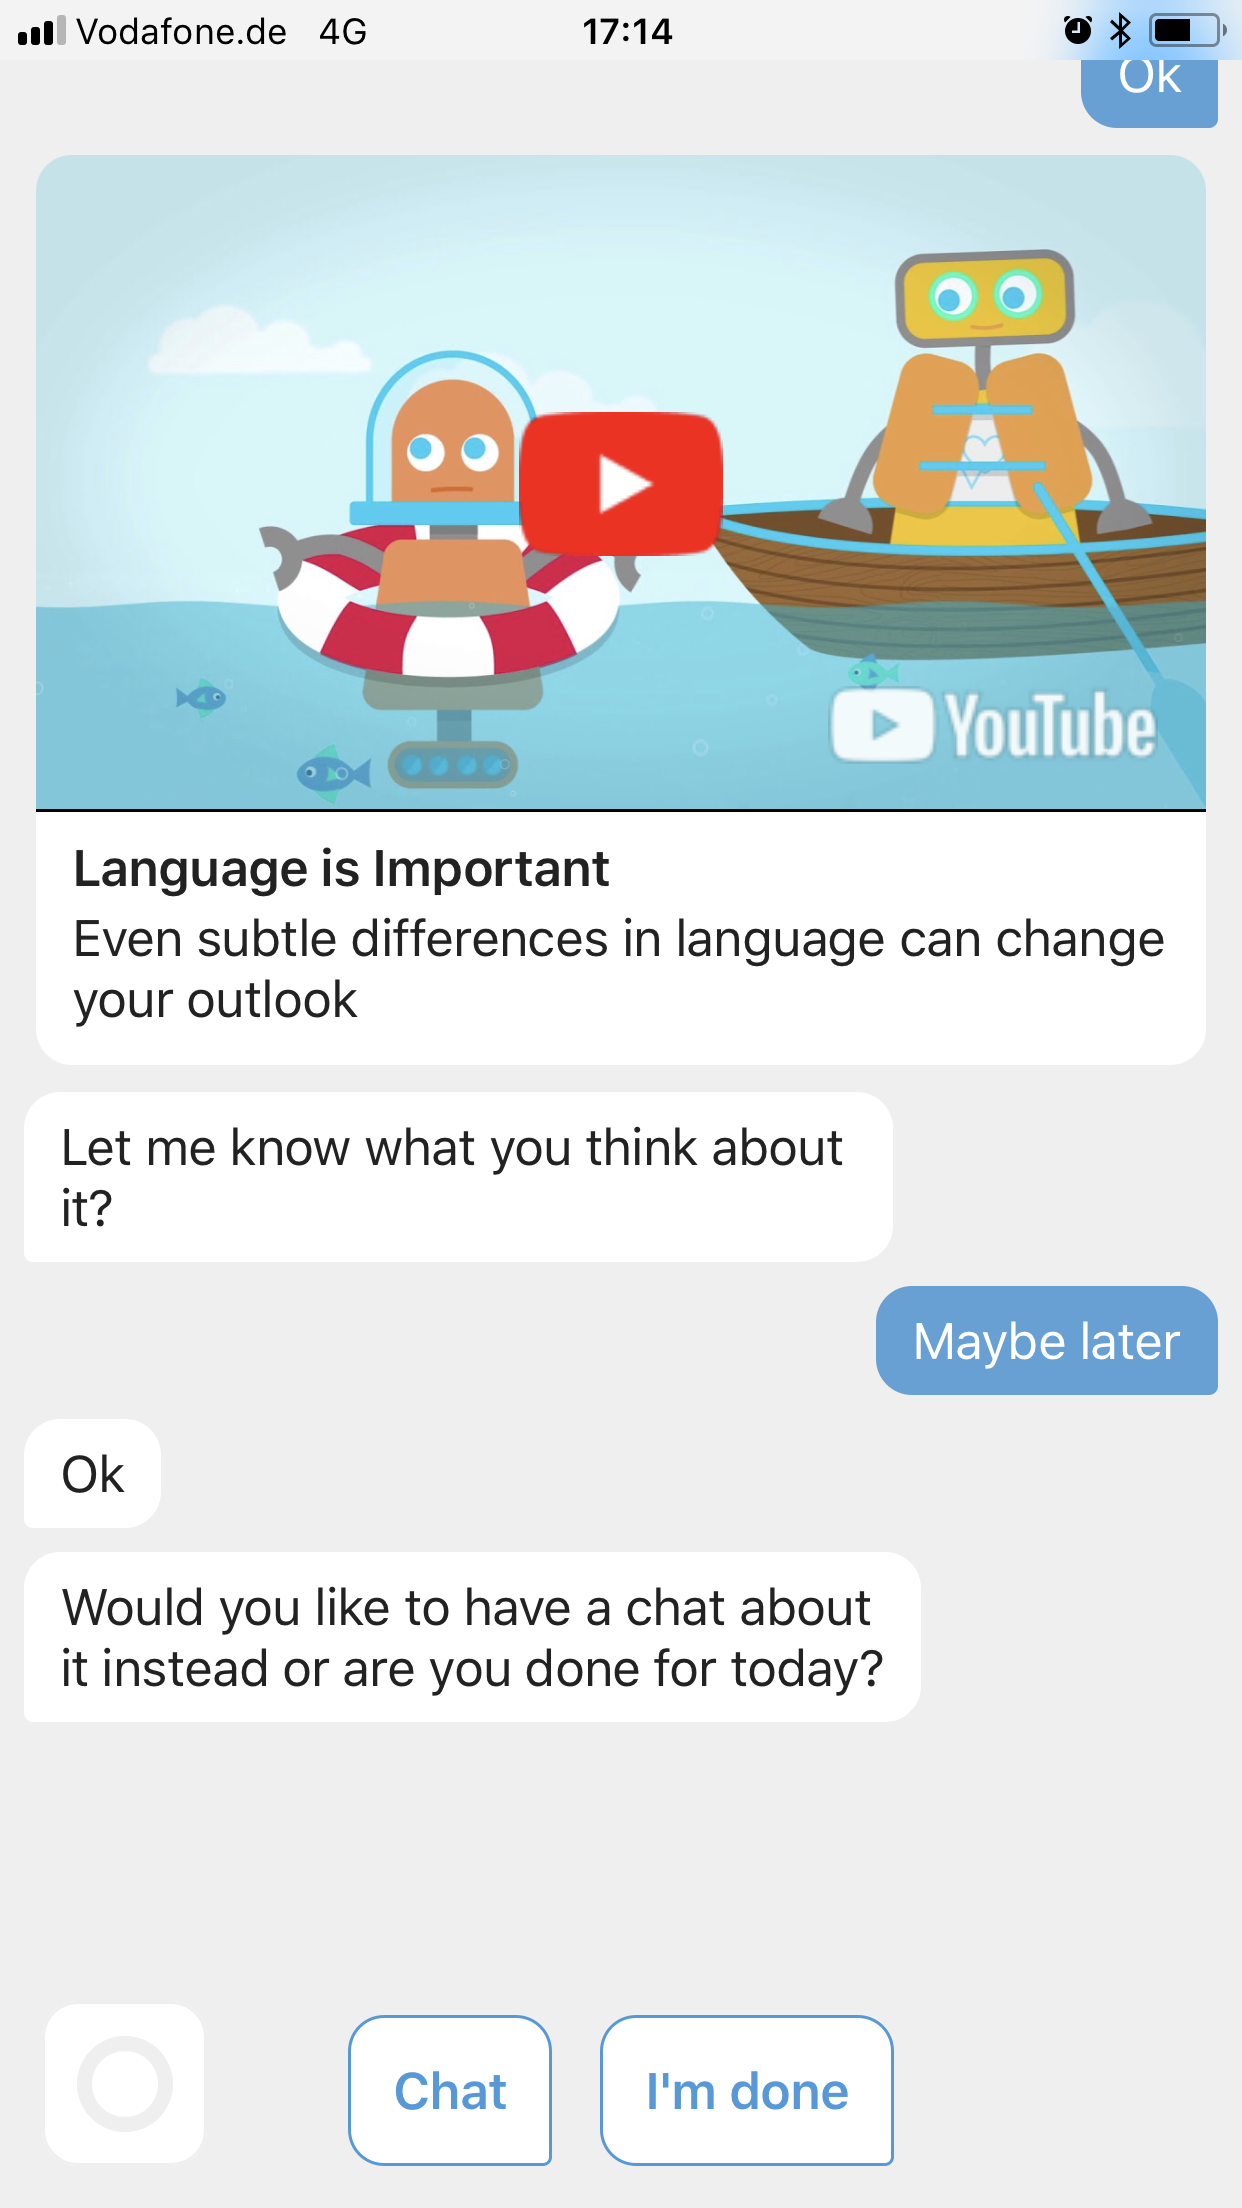 Woebot interface with video and chat options